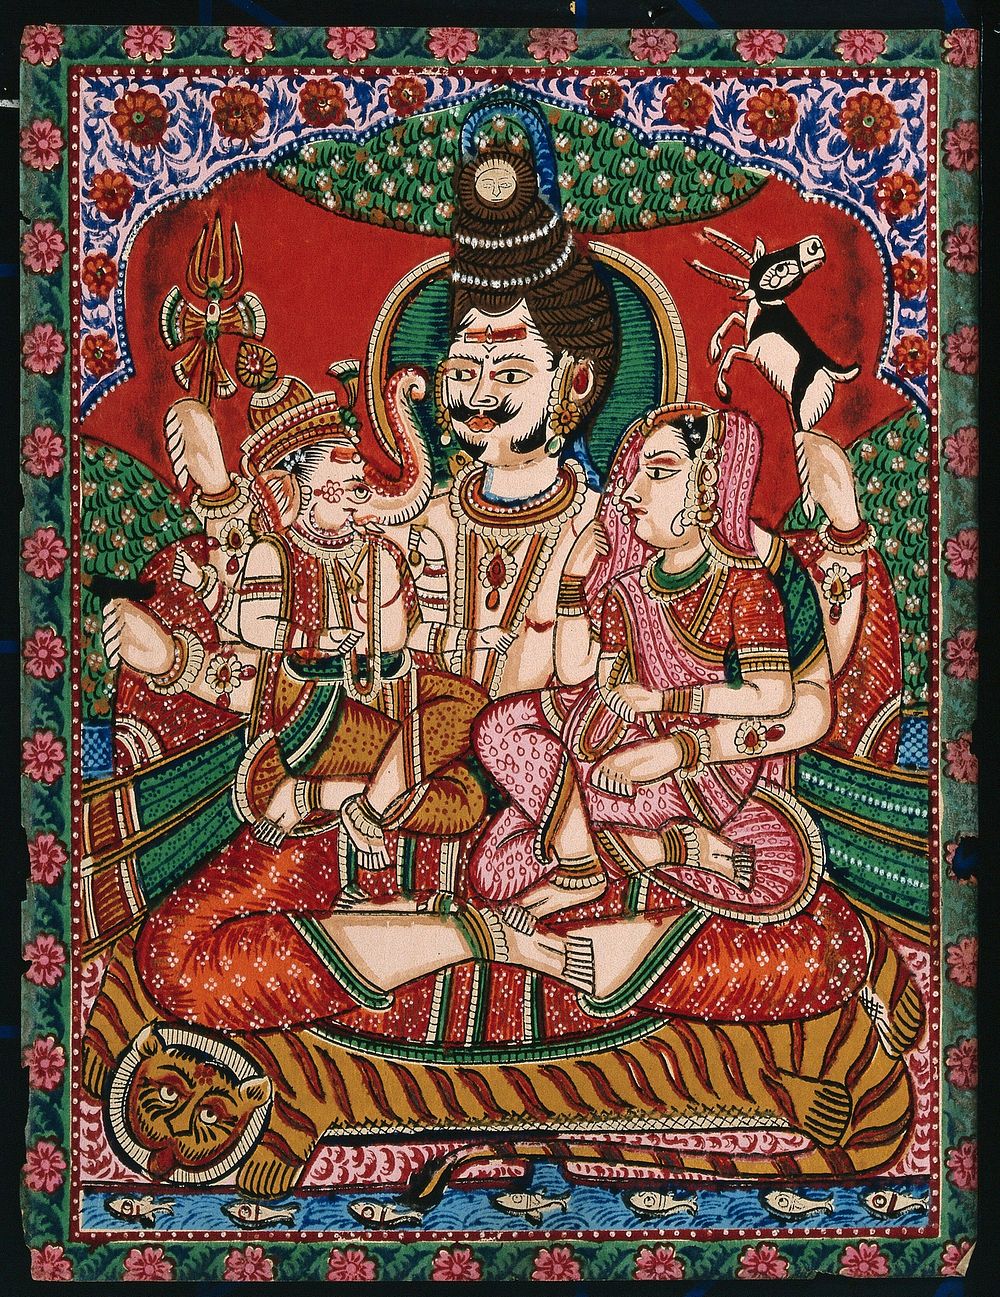 Shiva sitting on a tiger skin with his wife, Parvati and their son Ganesha on his lap. Gouache painting by an Indian painter.